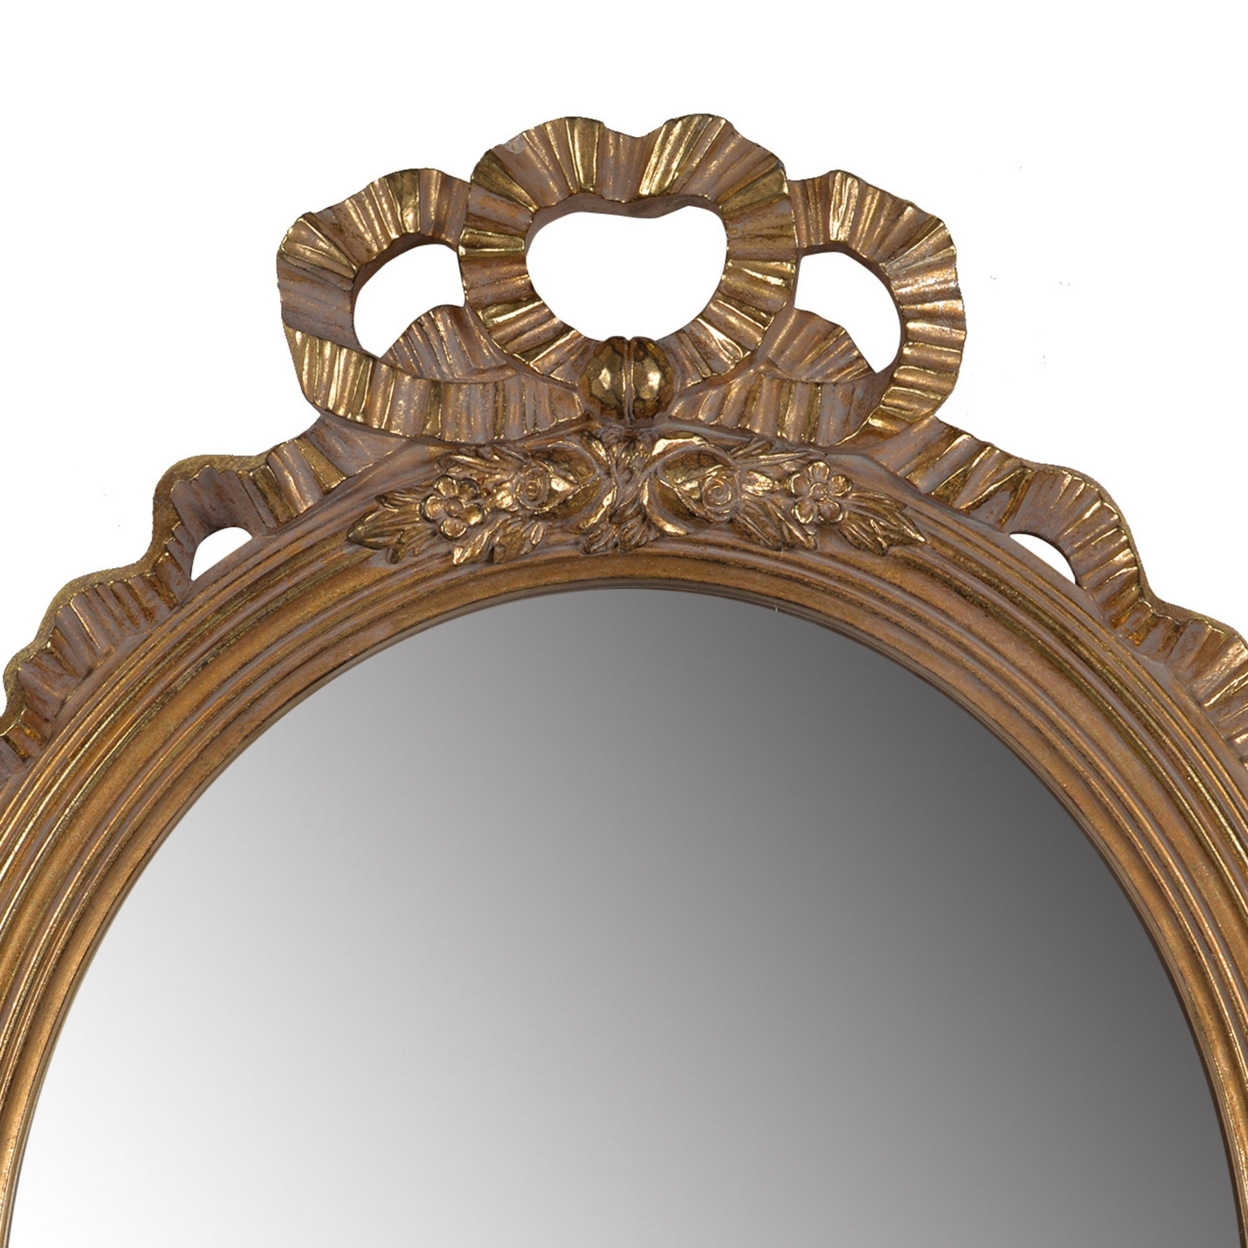 26 Inch Wall Accent Mirror With Ornate Polyresin Floral Crest, Antique Gold- Saltoro Sherpi